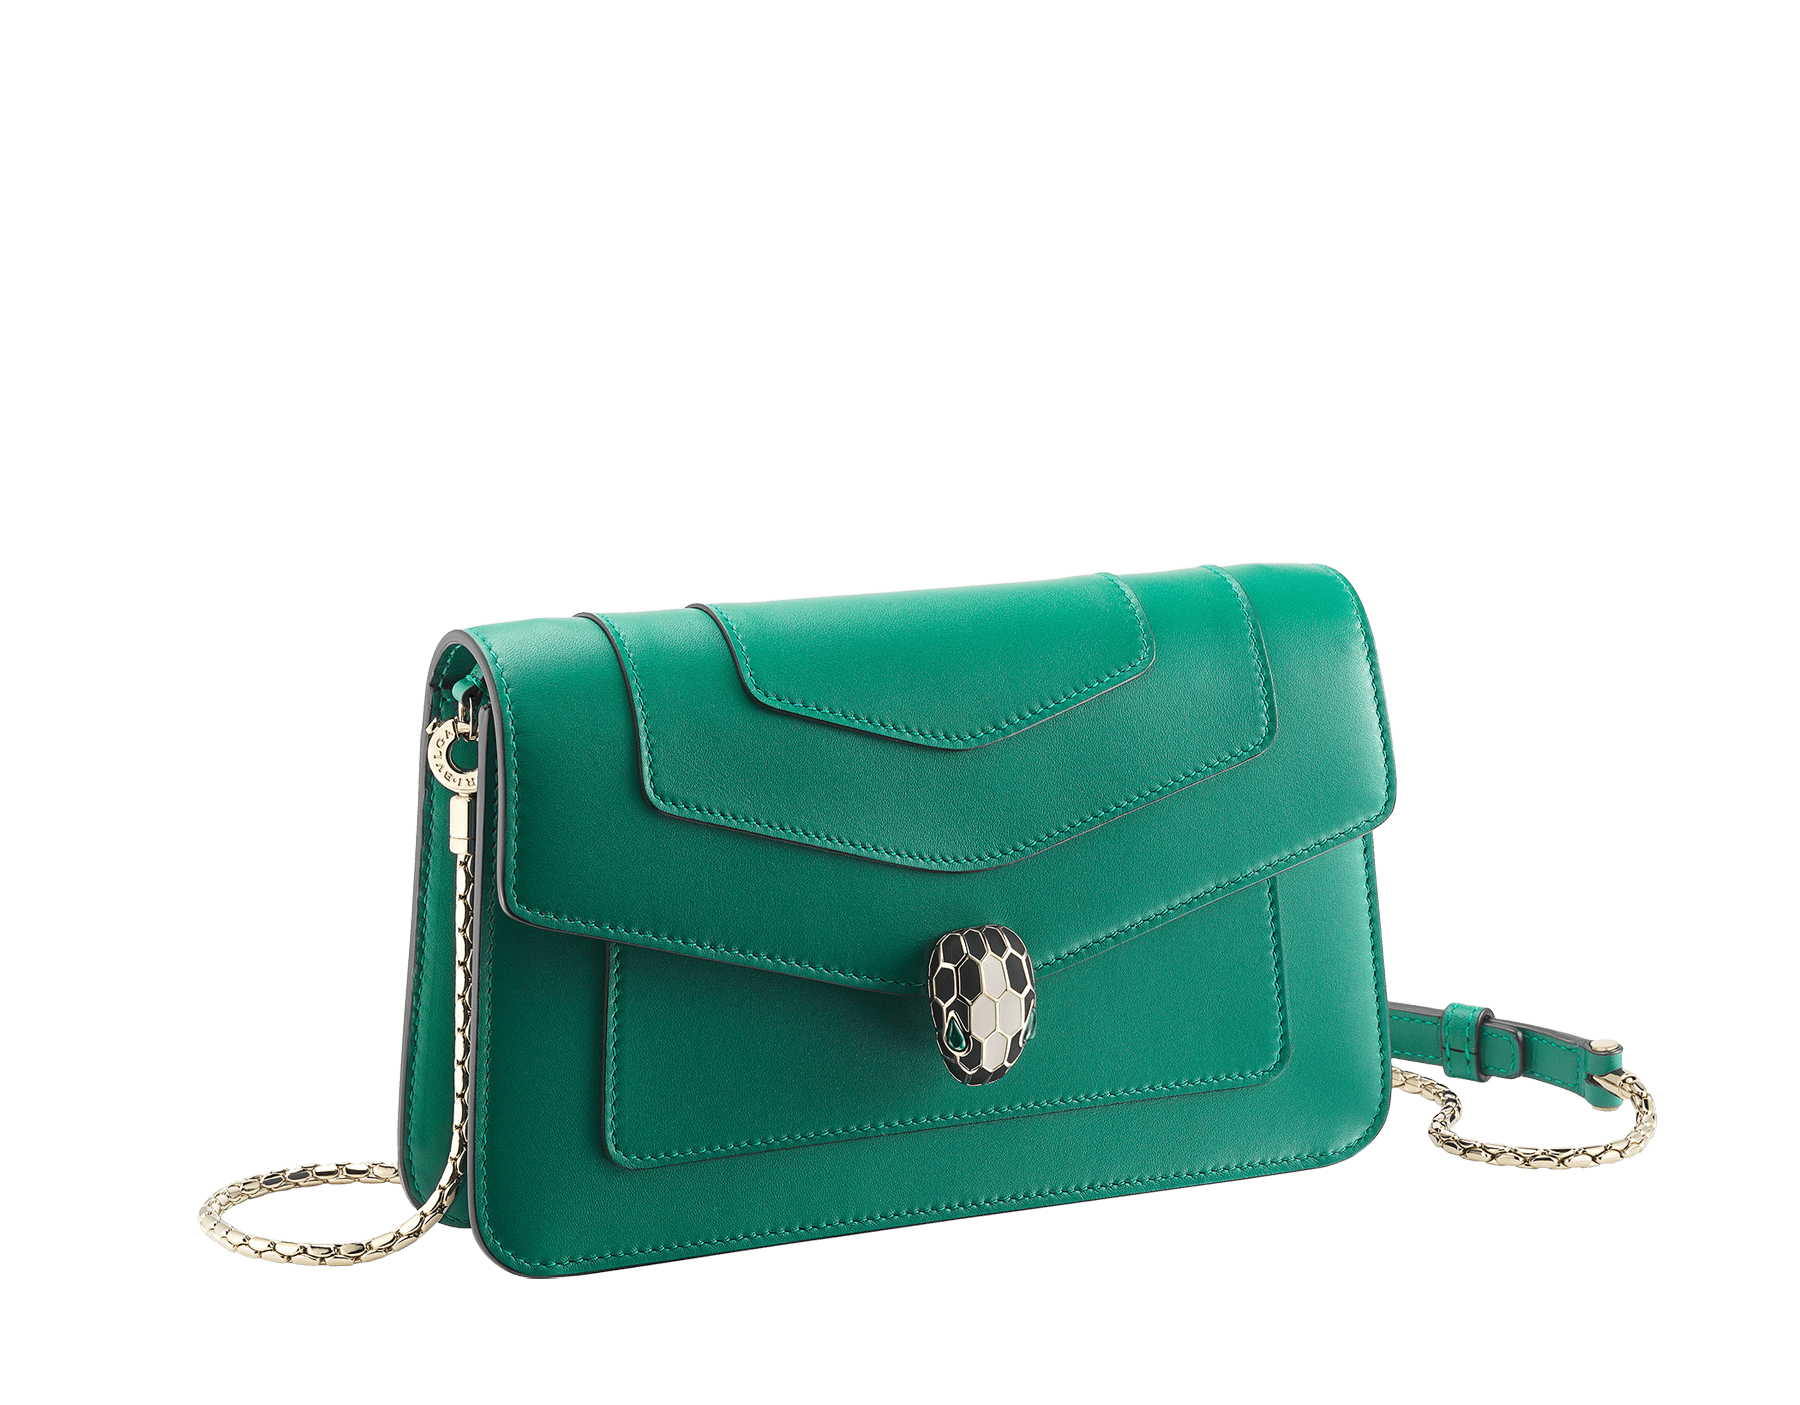 Serpenti Forever chain wallet in Niagara sapphire blue calf leather and silky coral pink nappa leather interior. Captivating palladium-plated brass snakehead magnetic closure embellished with black and Niagara sapphire blue enamel scales and black onyx eyes. SEA-CHAINPOCHETTE-LCL image 1